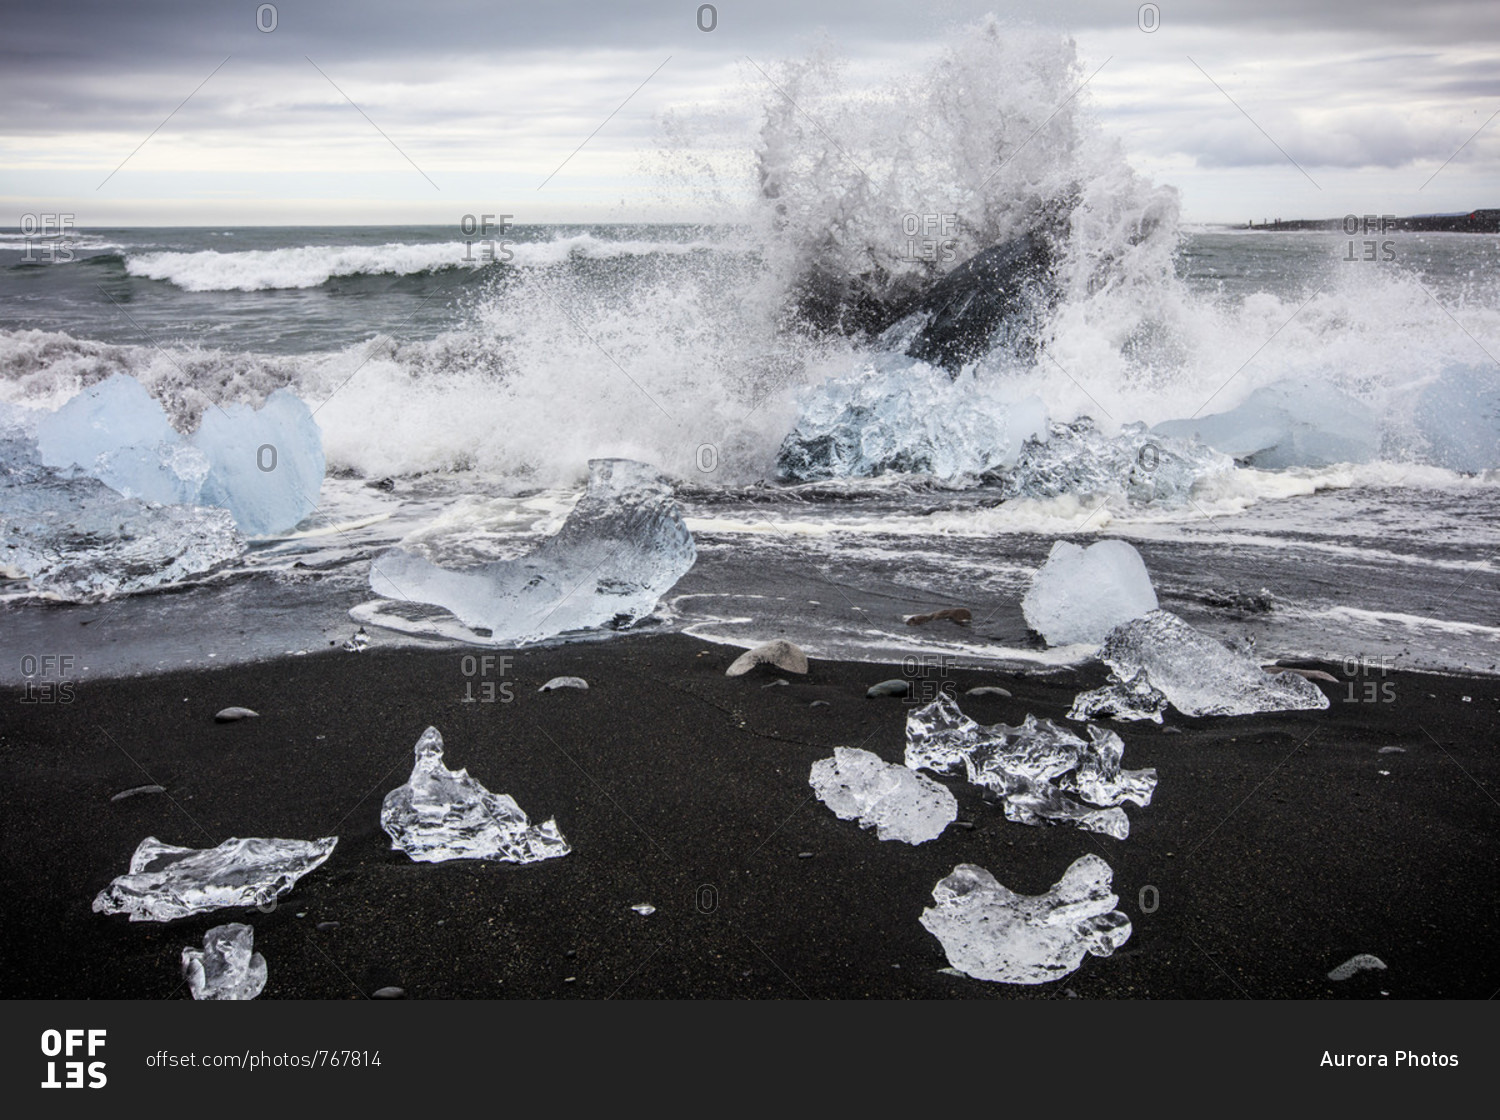 Diamond Beach is one of Iceland's most iconic travel destinations. Located in Southeastern Iceland about two hours from the town of Vik, the black sand beach has pieces of iceberg that wash ashore from Jokulsarlon Glacier Lagoon. The Lagoon has grown four